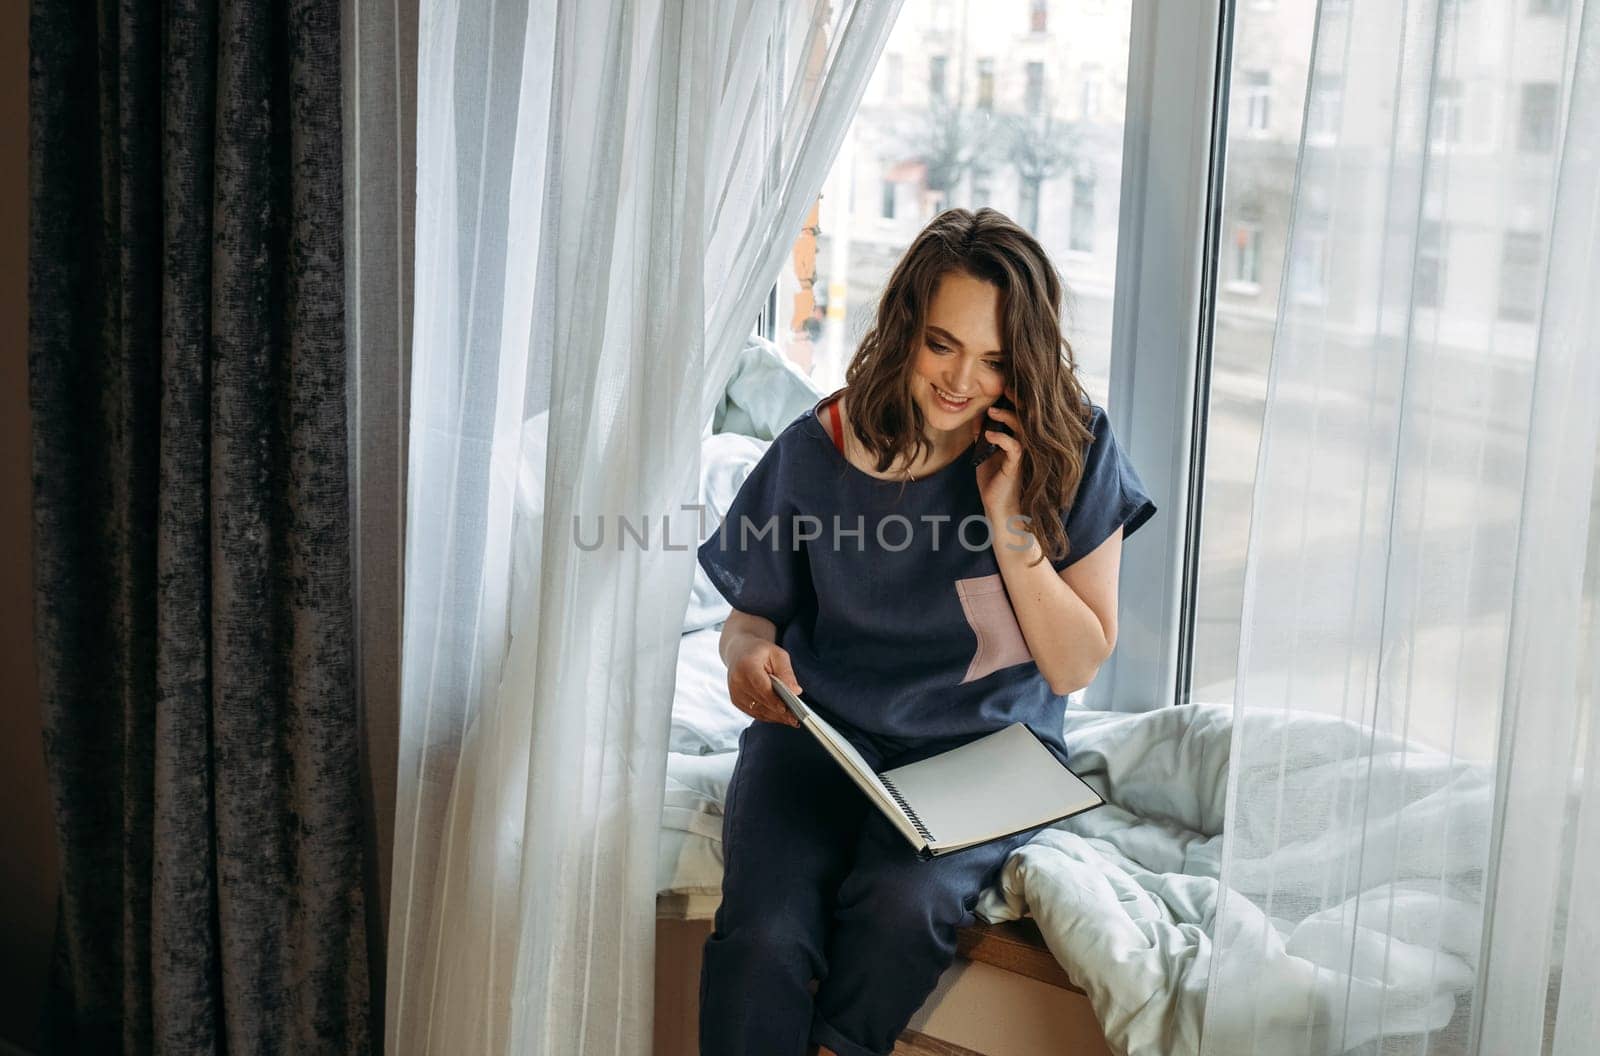 A young woman sitting on a windowsill talking to clients, holding a notepad in her hands by Sd28DimoN_1976